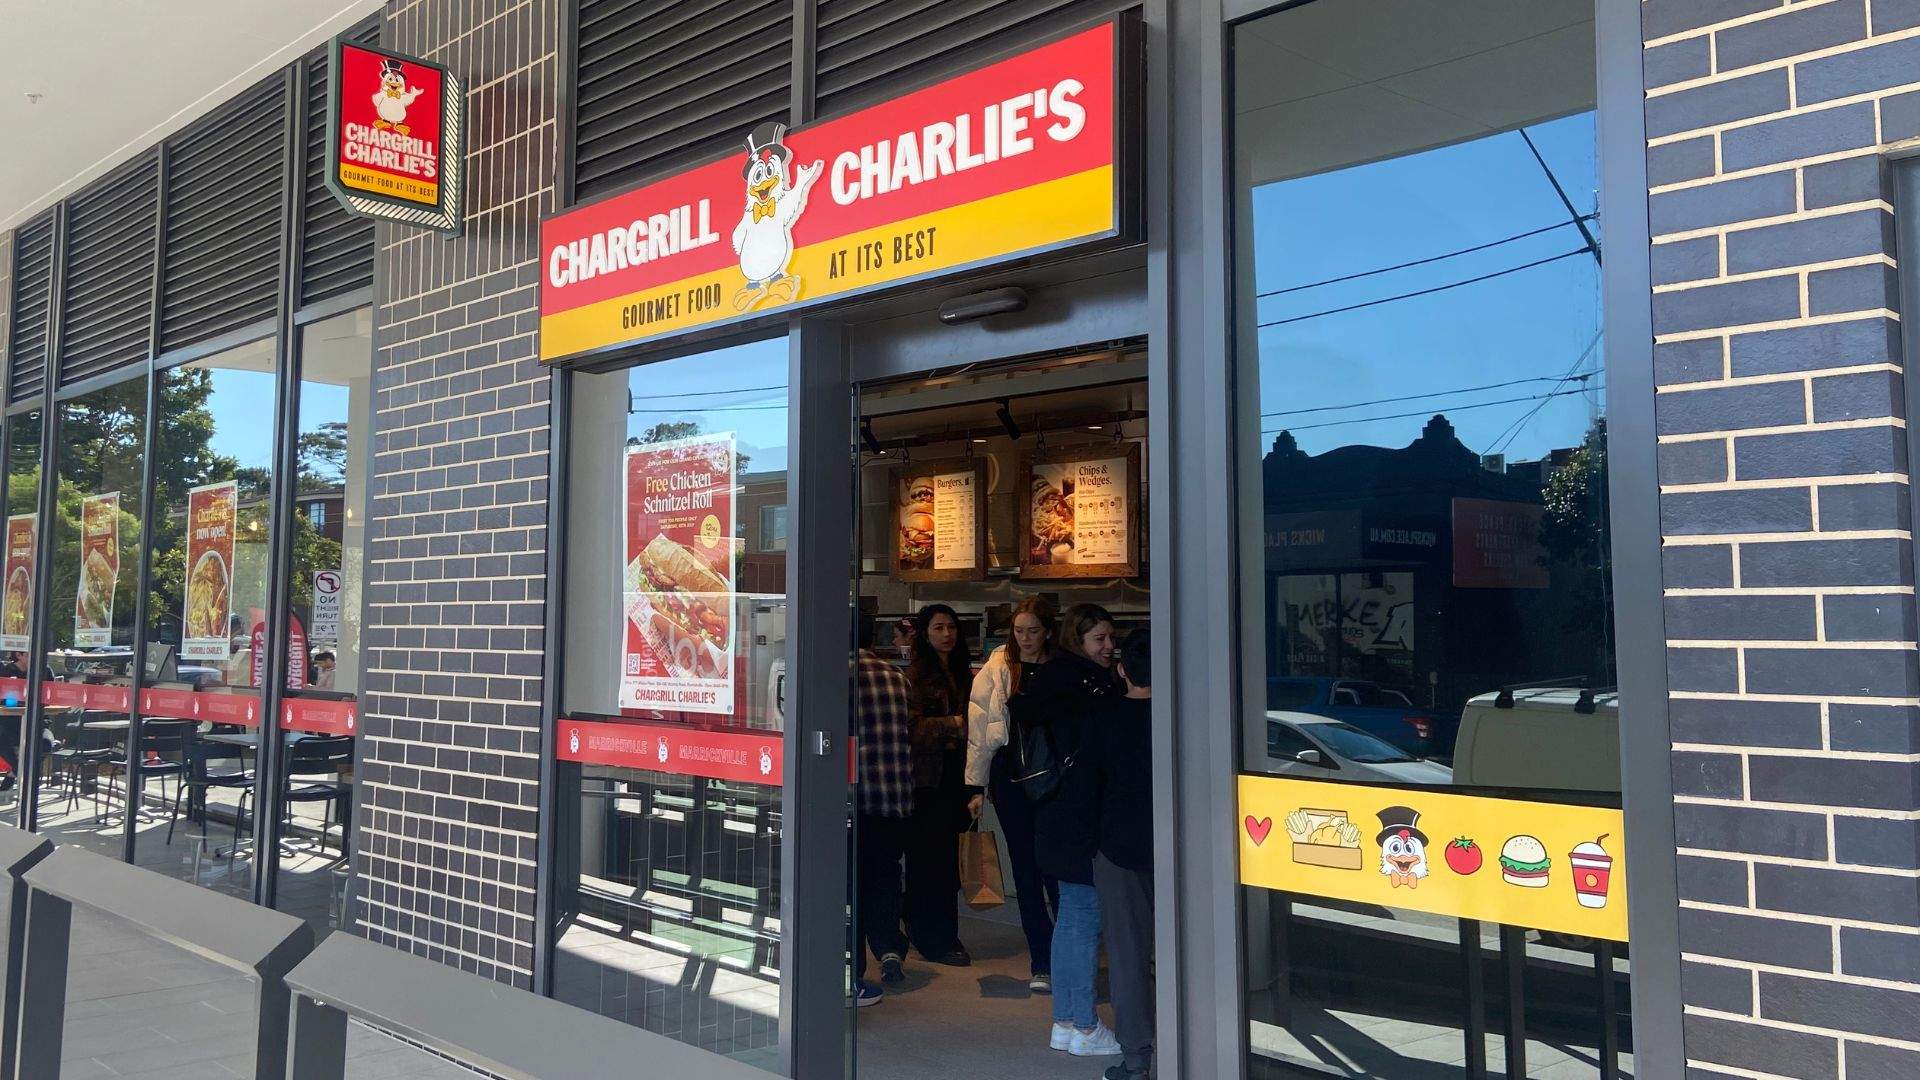 Free Schnitzel Rolls at Chargrill Charlie's